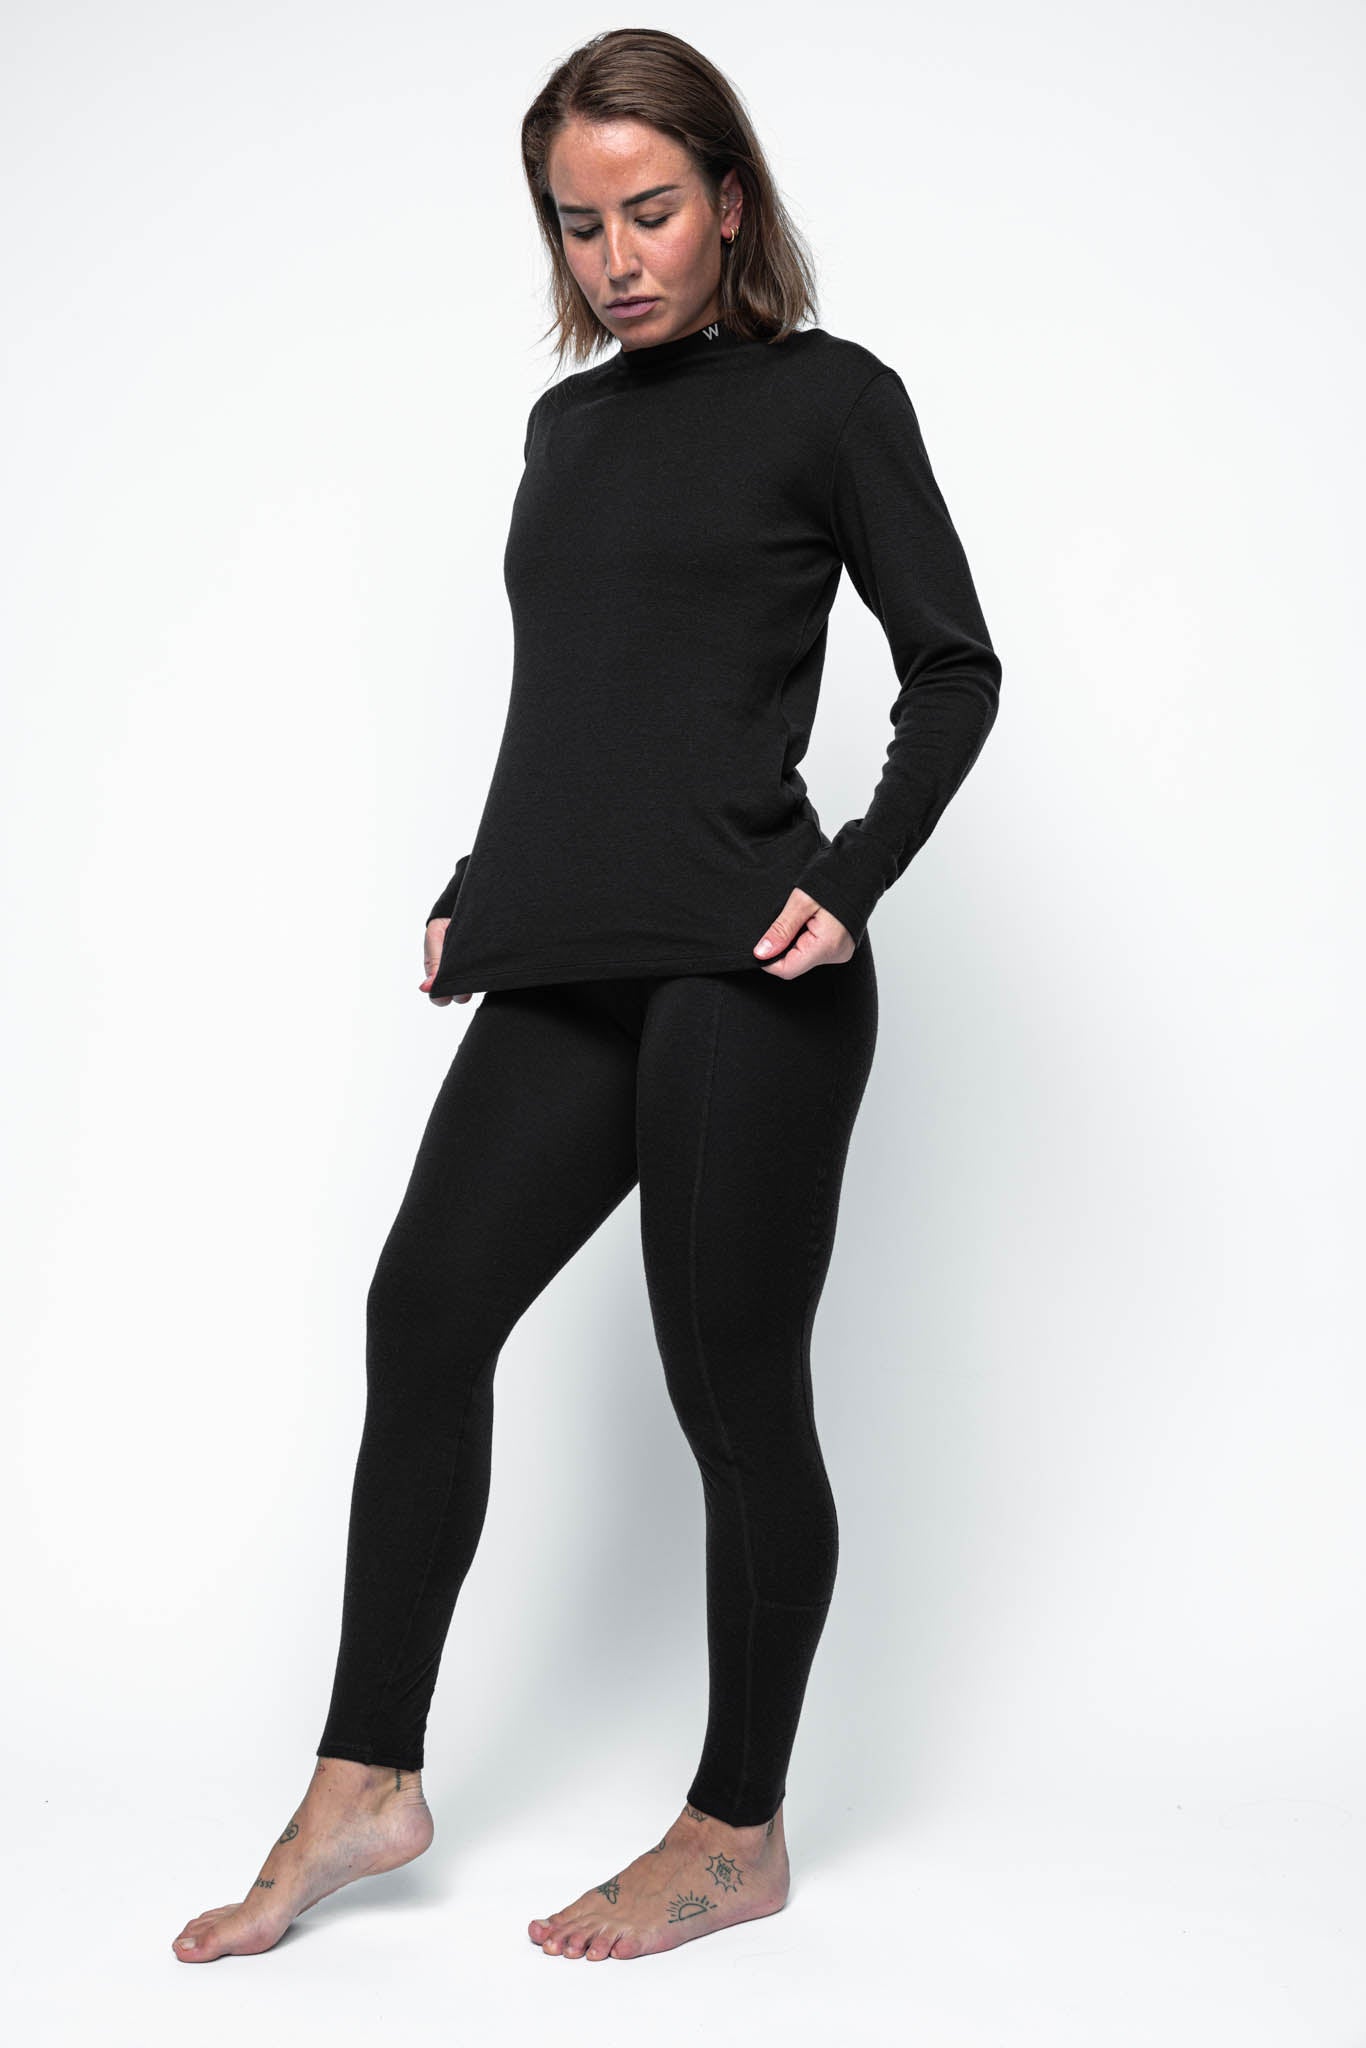 Merino Wool Base Layer Set For Women 250G Midweight Thermal Long Underwear  Womens With Anti Odor Top And Bottoms For Warmth 231122 From Powerstore02,  $54.36